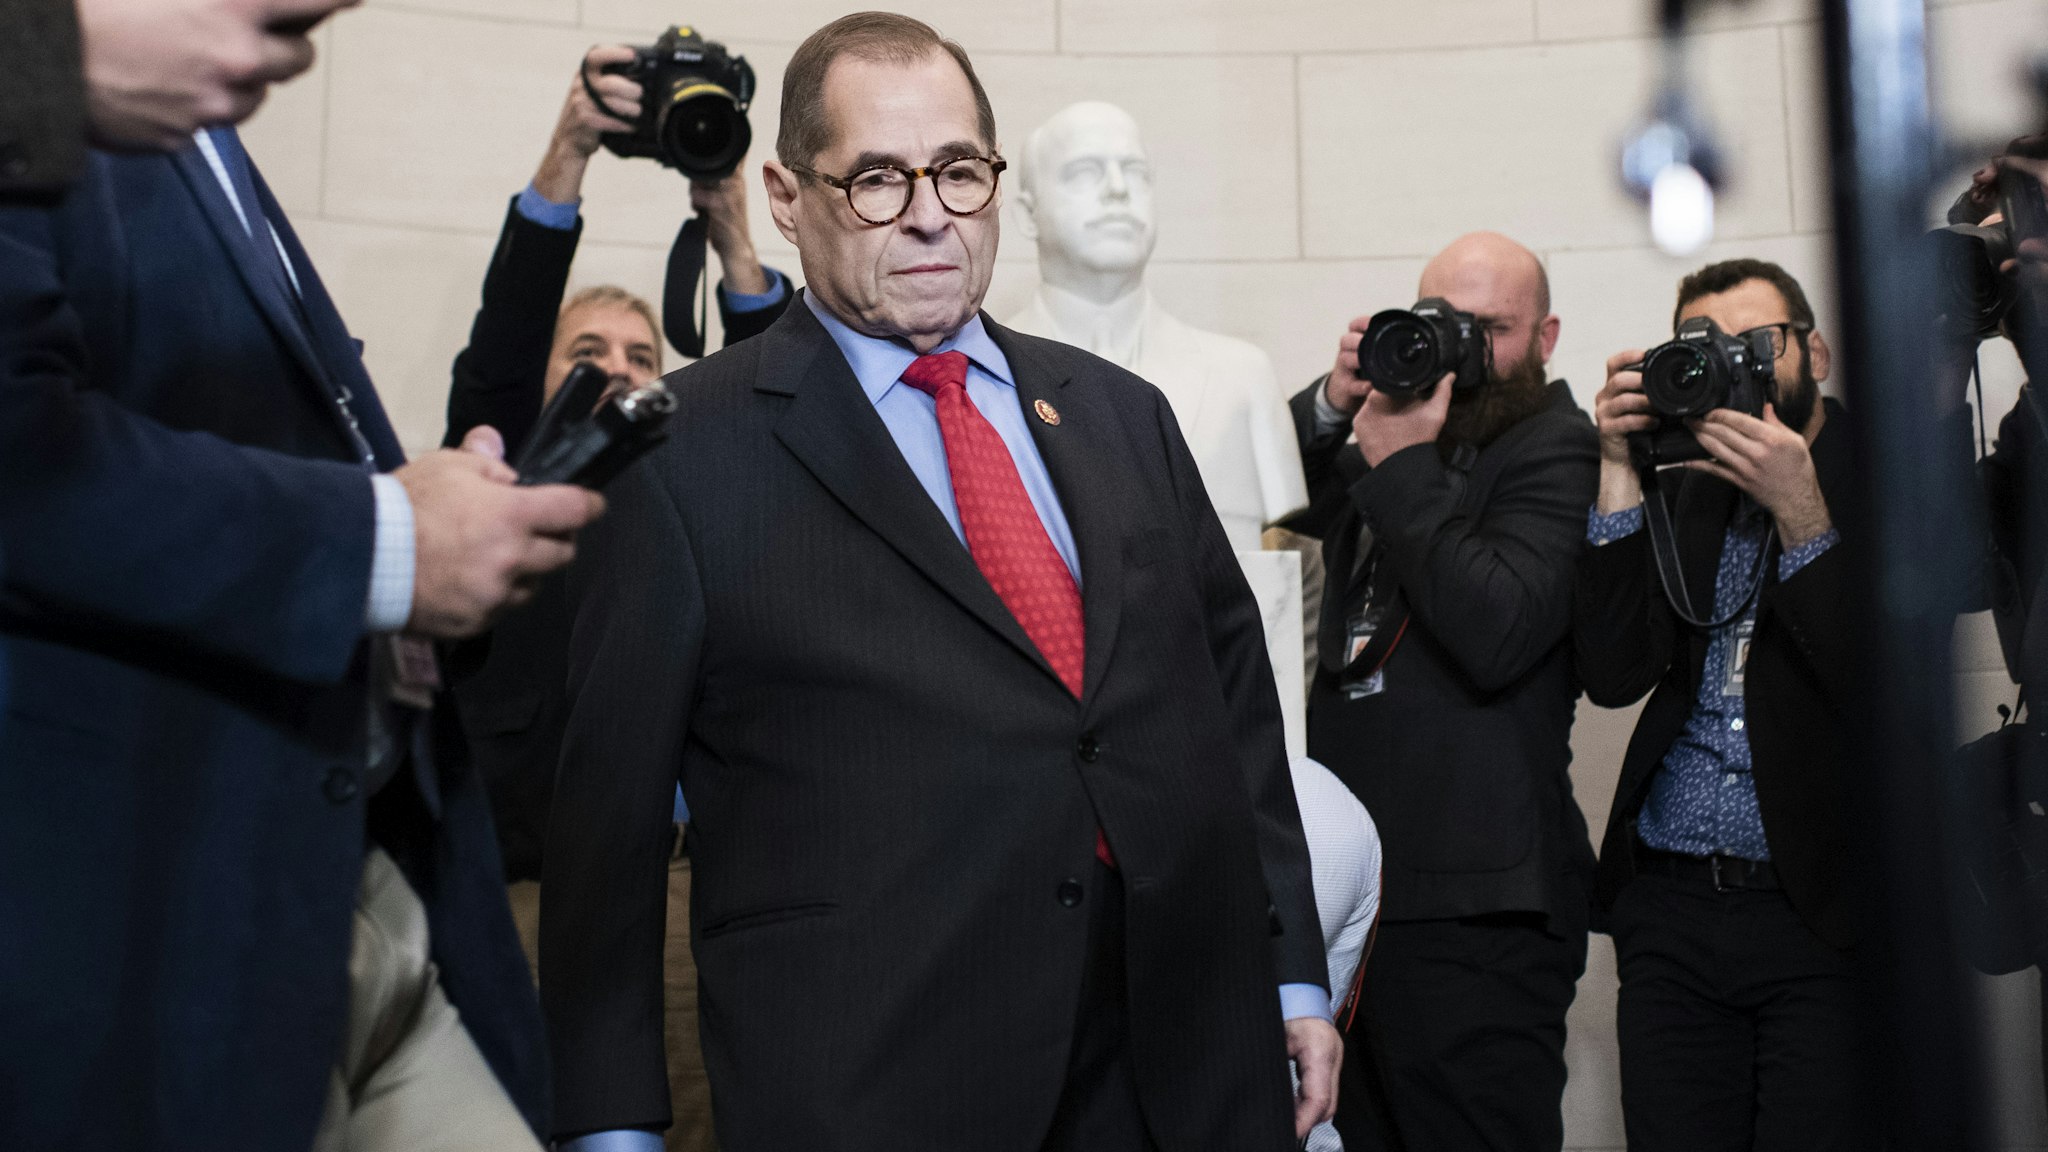 UNITED STATES - DECEMBER 13: Chairman Jerrold Nadler, D-N.Y., prepares to address the media after the House Judiciary Committee passed two articles of impeachment against President Donald J. Trump on Friday, December 13, 2019.